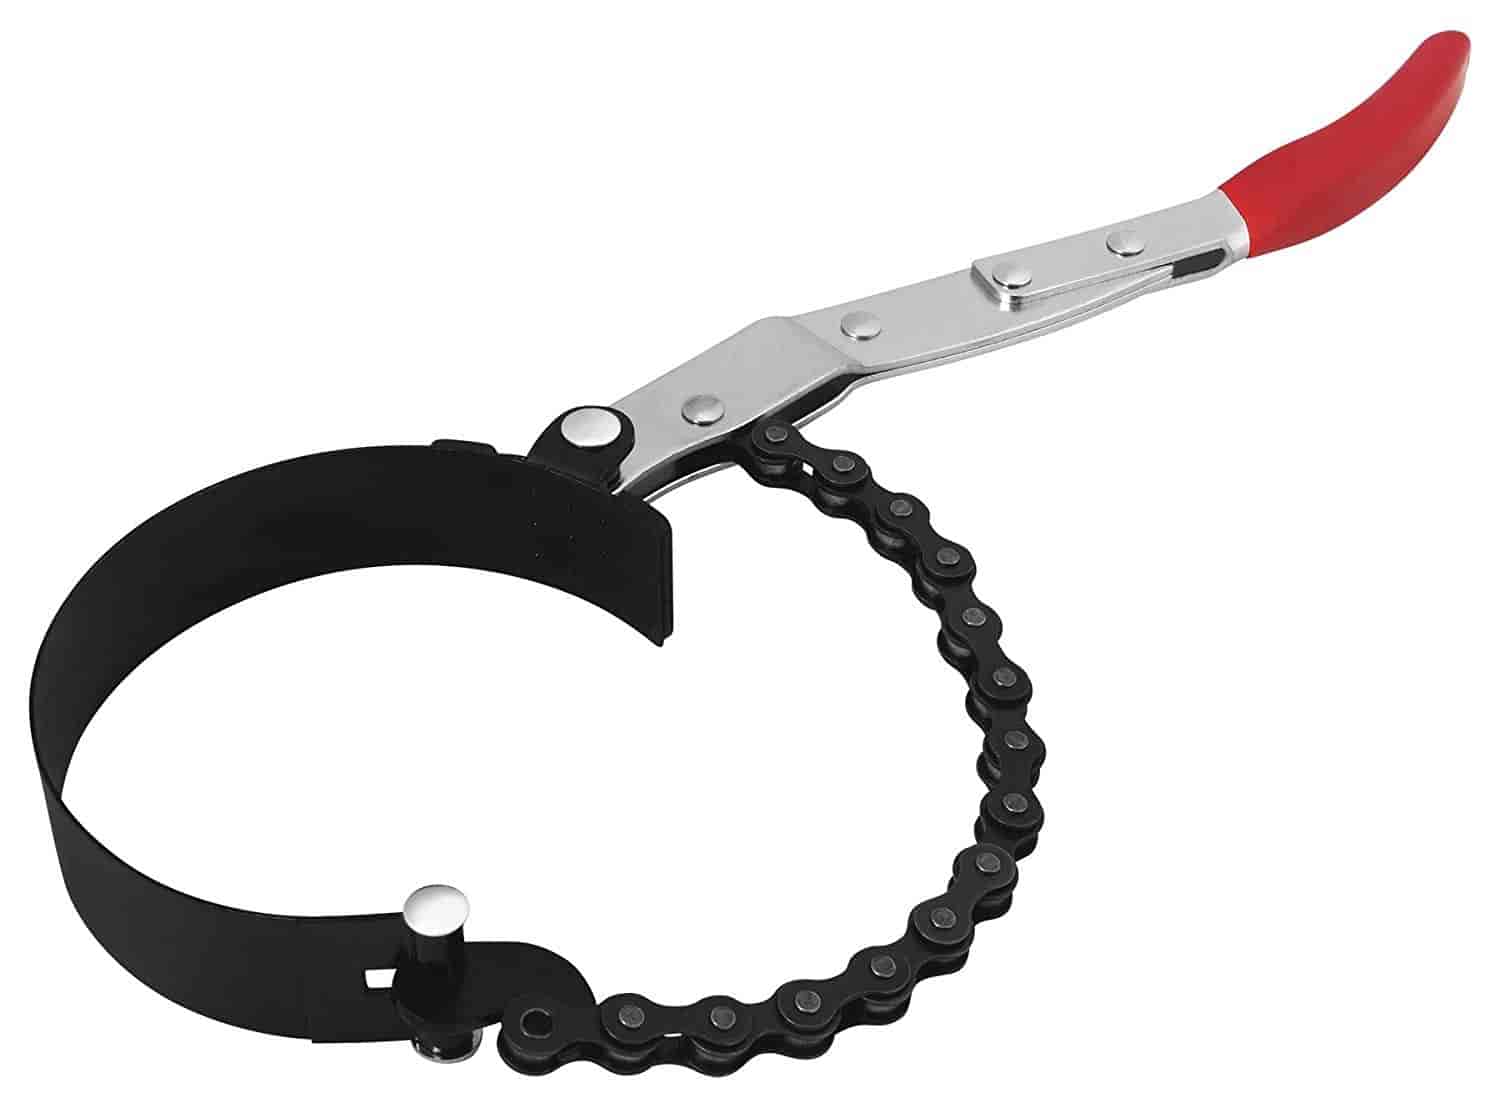 Chain and Band Filter Wrench [2 3/4 in. to 4 1/2 in. Capacity]